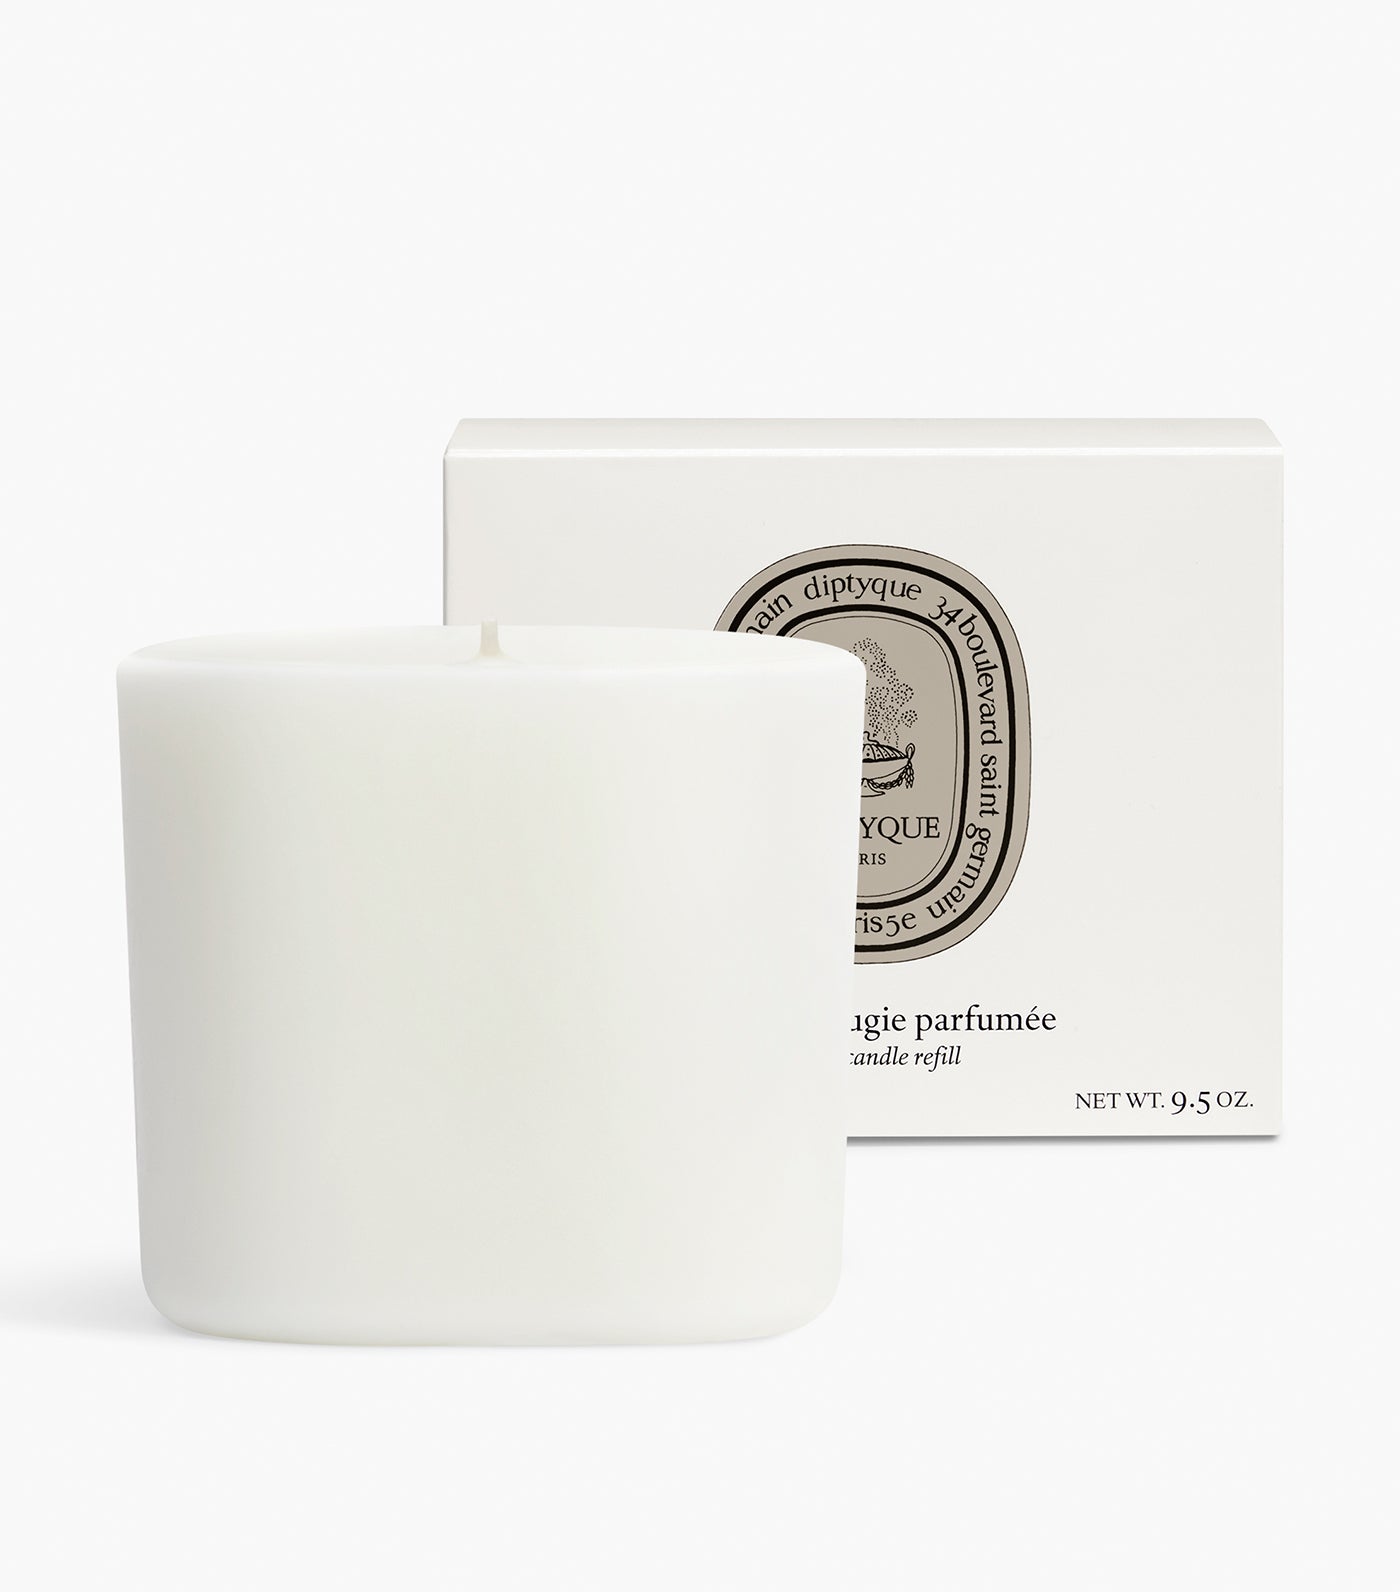 La Vallée du Temps (Valley Of Time) Candle Refill